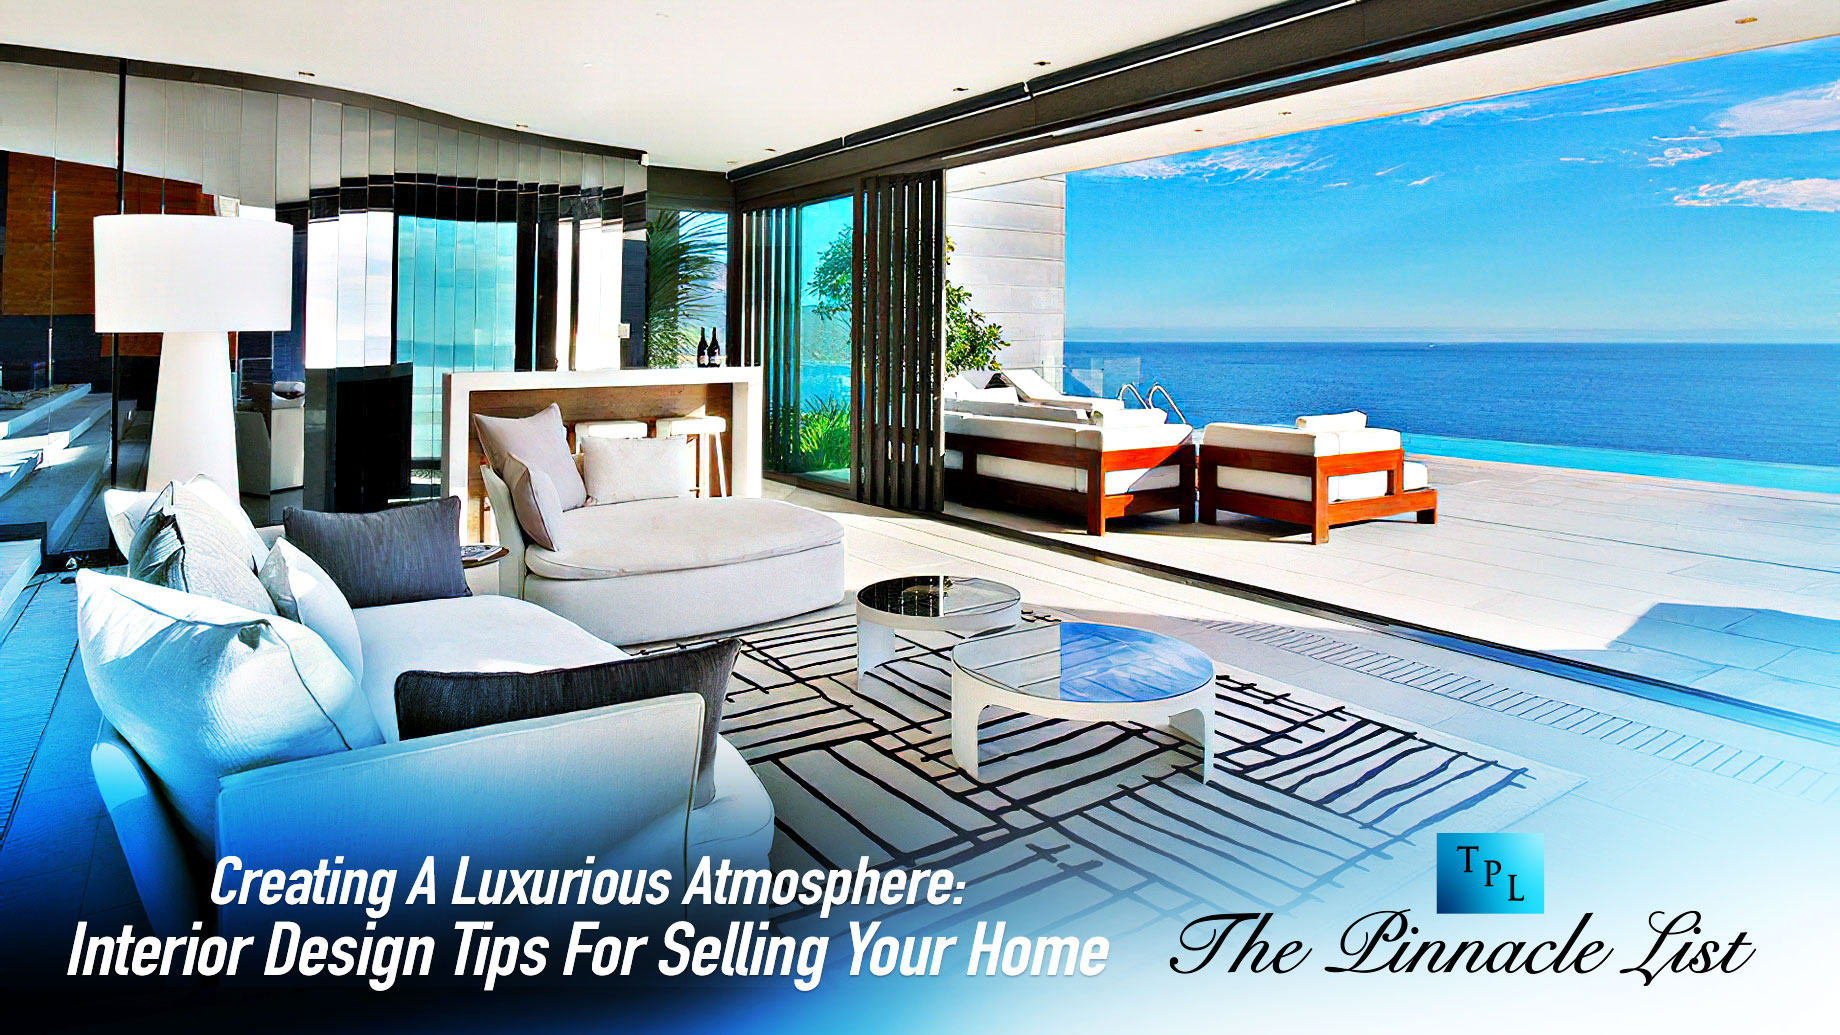 Creating A Luxurious Atmosphere: Interior Design Tips For Selling Your Home